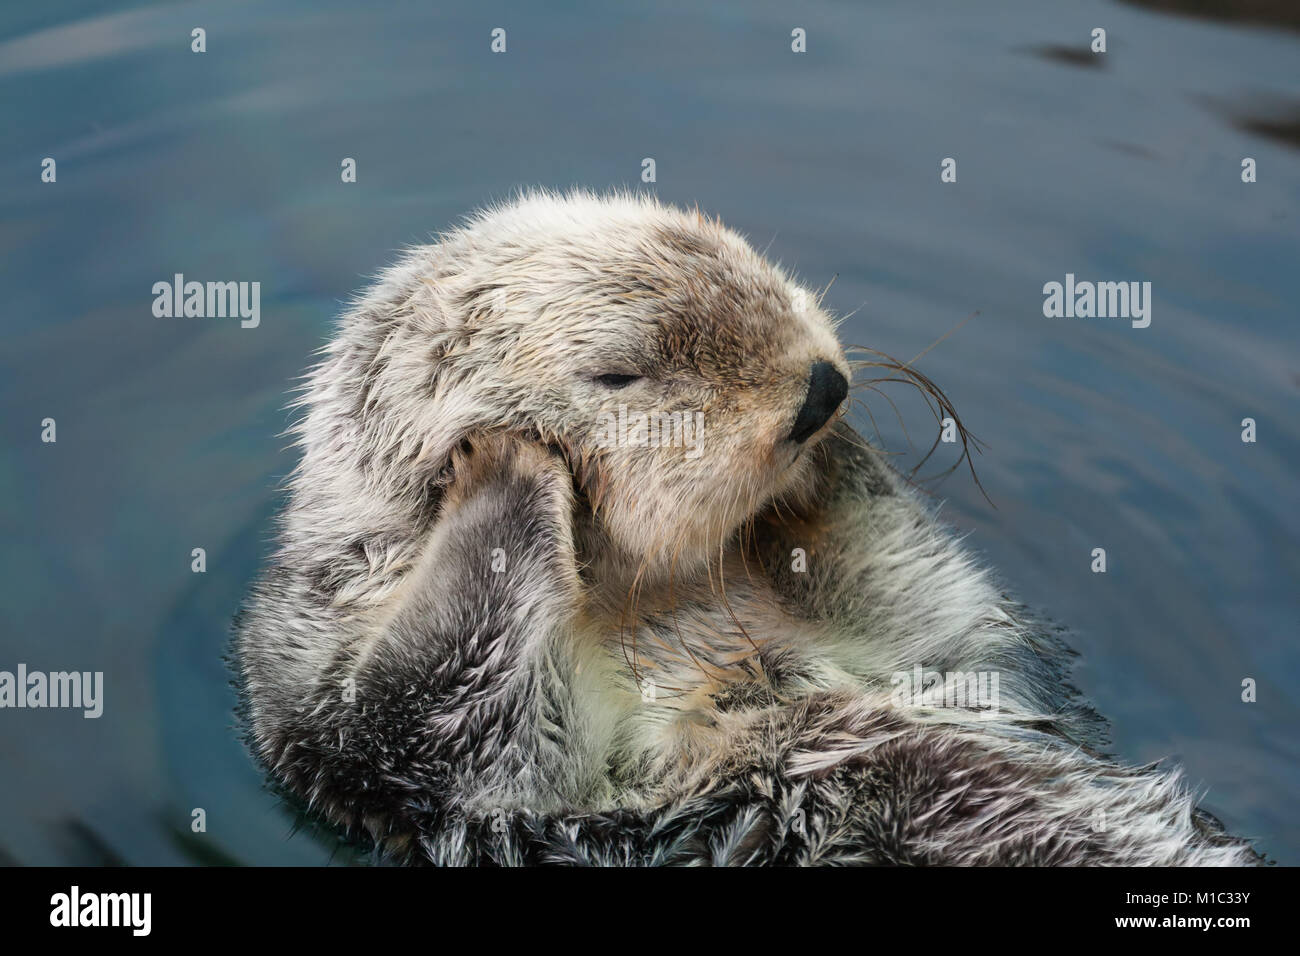 Sea otter swims on the back Stock Photo